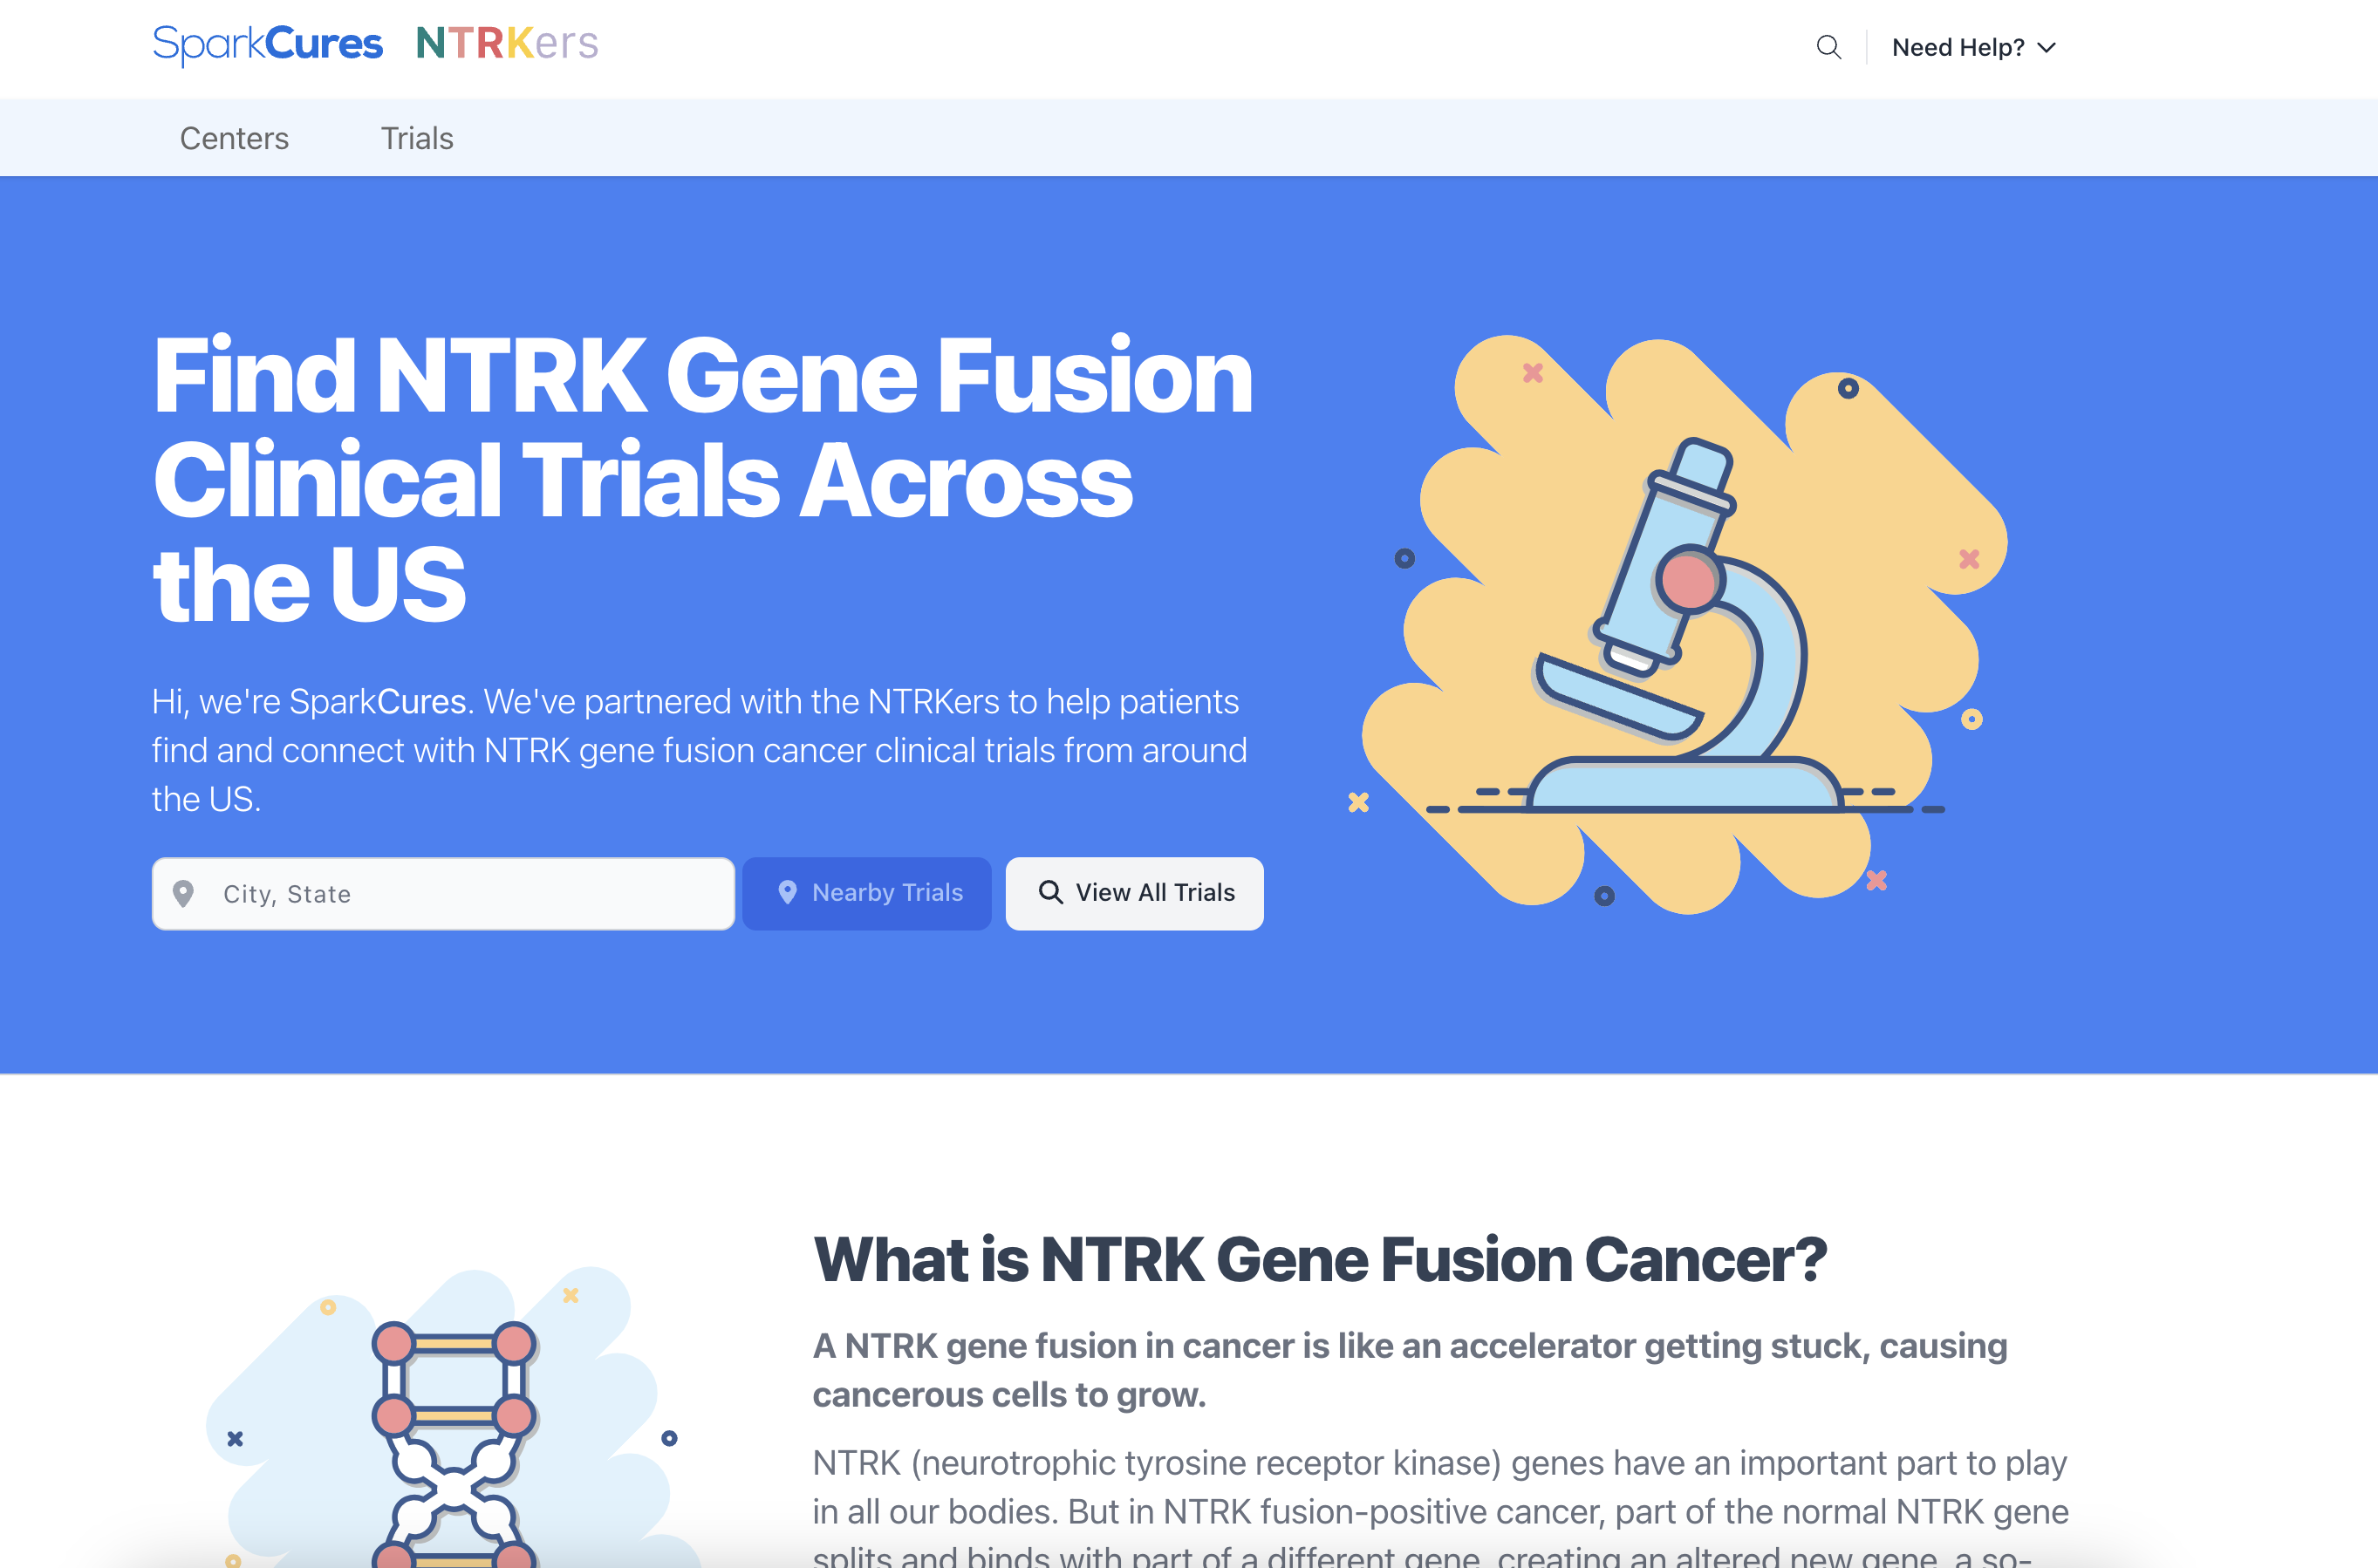 The NTRKers Foundation partners with SparkCures, LLC to bring clinical trial matching to the NTRK gene fusion cancer patient community